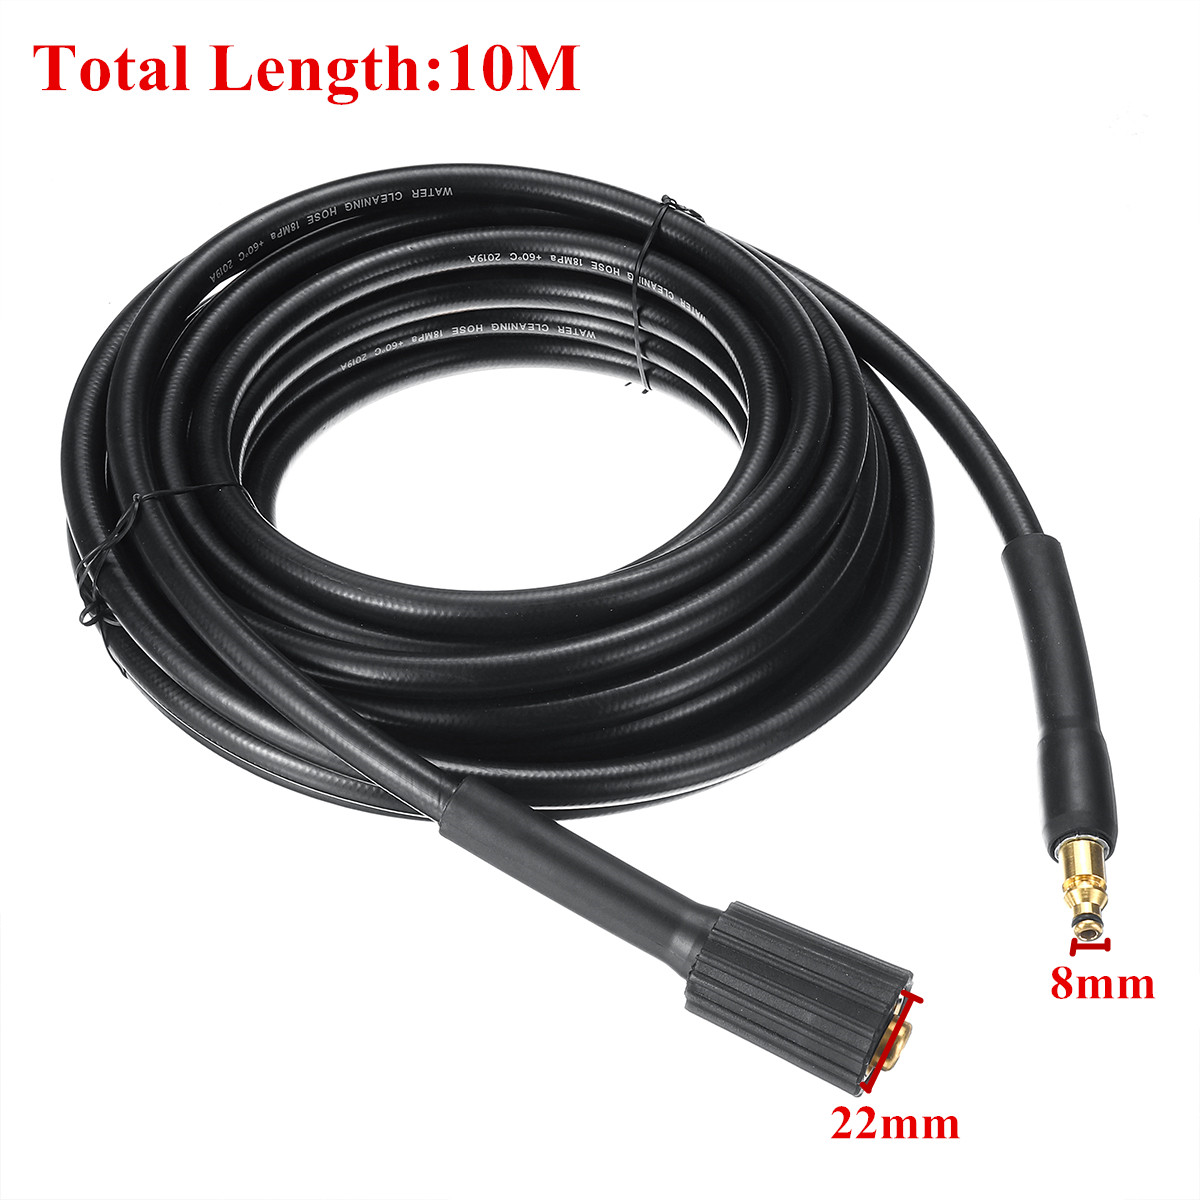 10-Meters-High-Pressure-Washer-Hose-Car-Washer-Water-Cleaning-Extension-Hose-For-Nilfisk-C100-C110-C-1563247-4